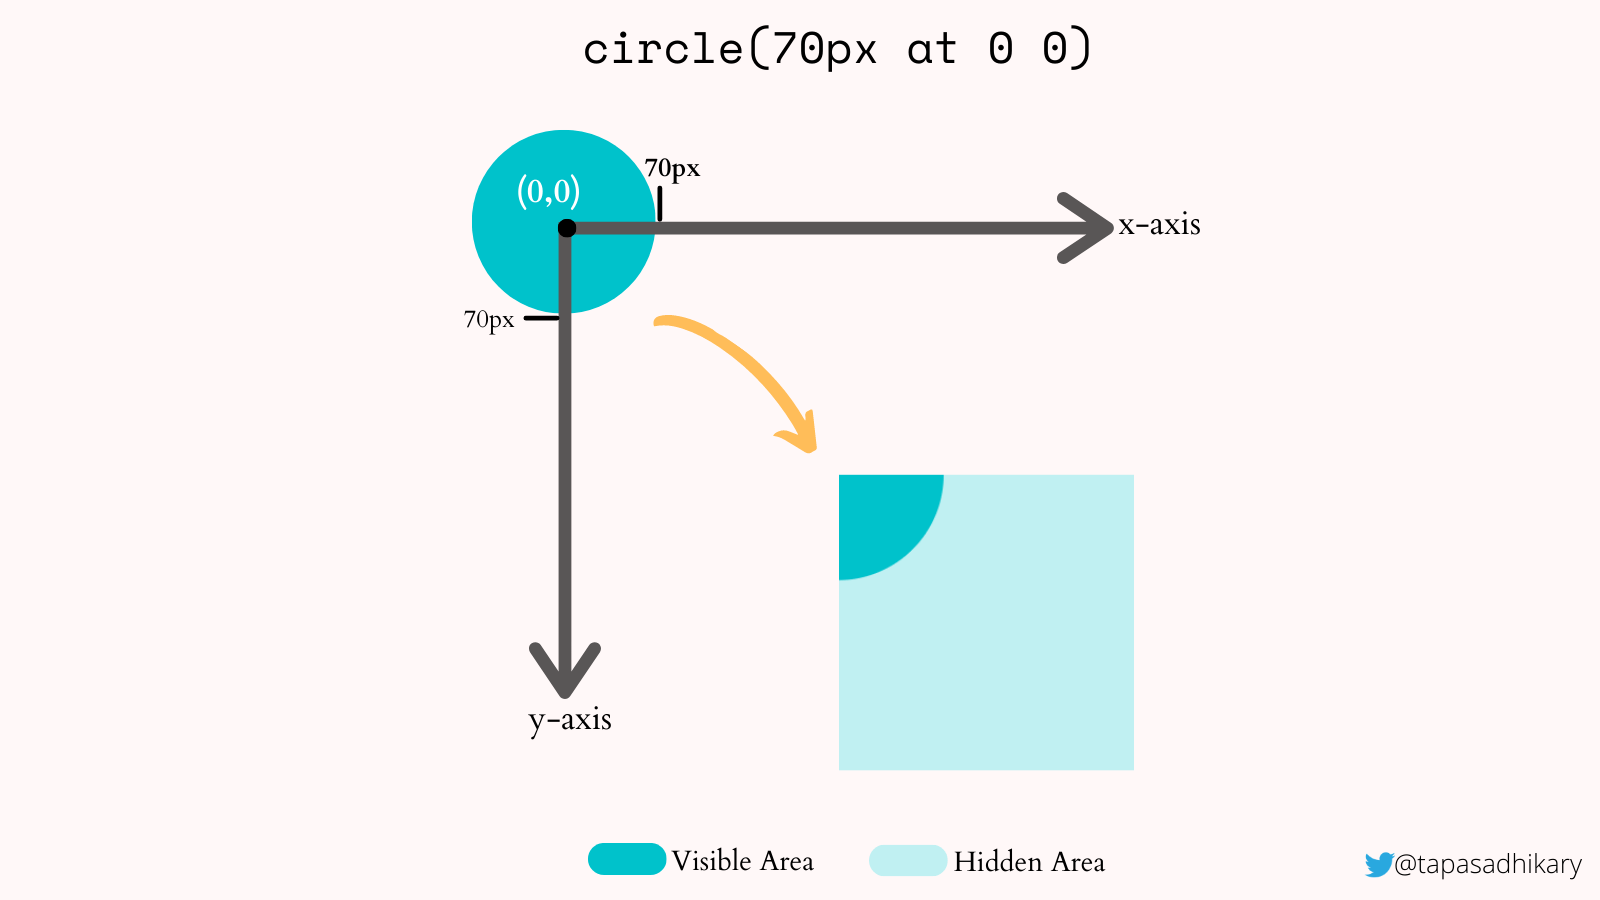 The center of a blue circle is placed at the 0,0 coordinates with a 70px by 70px area clipping the bottom-left region of the circle.